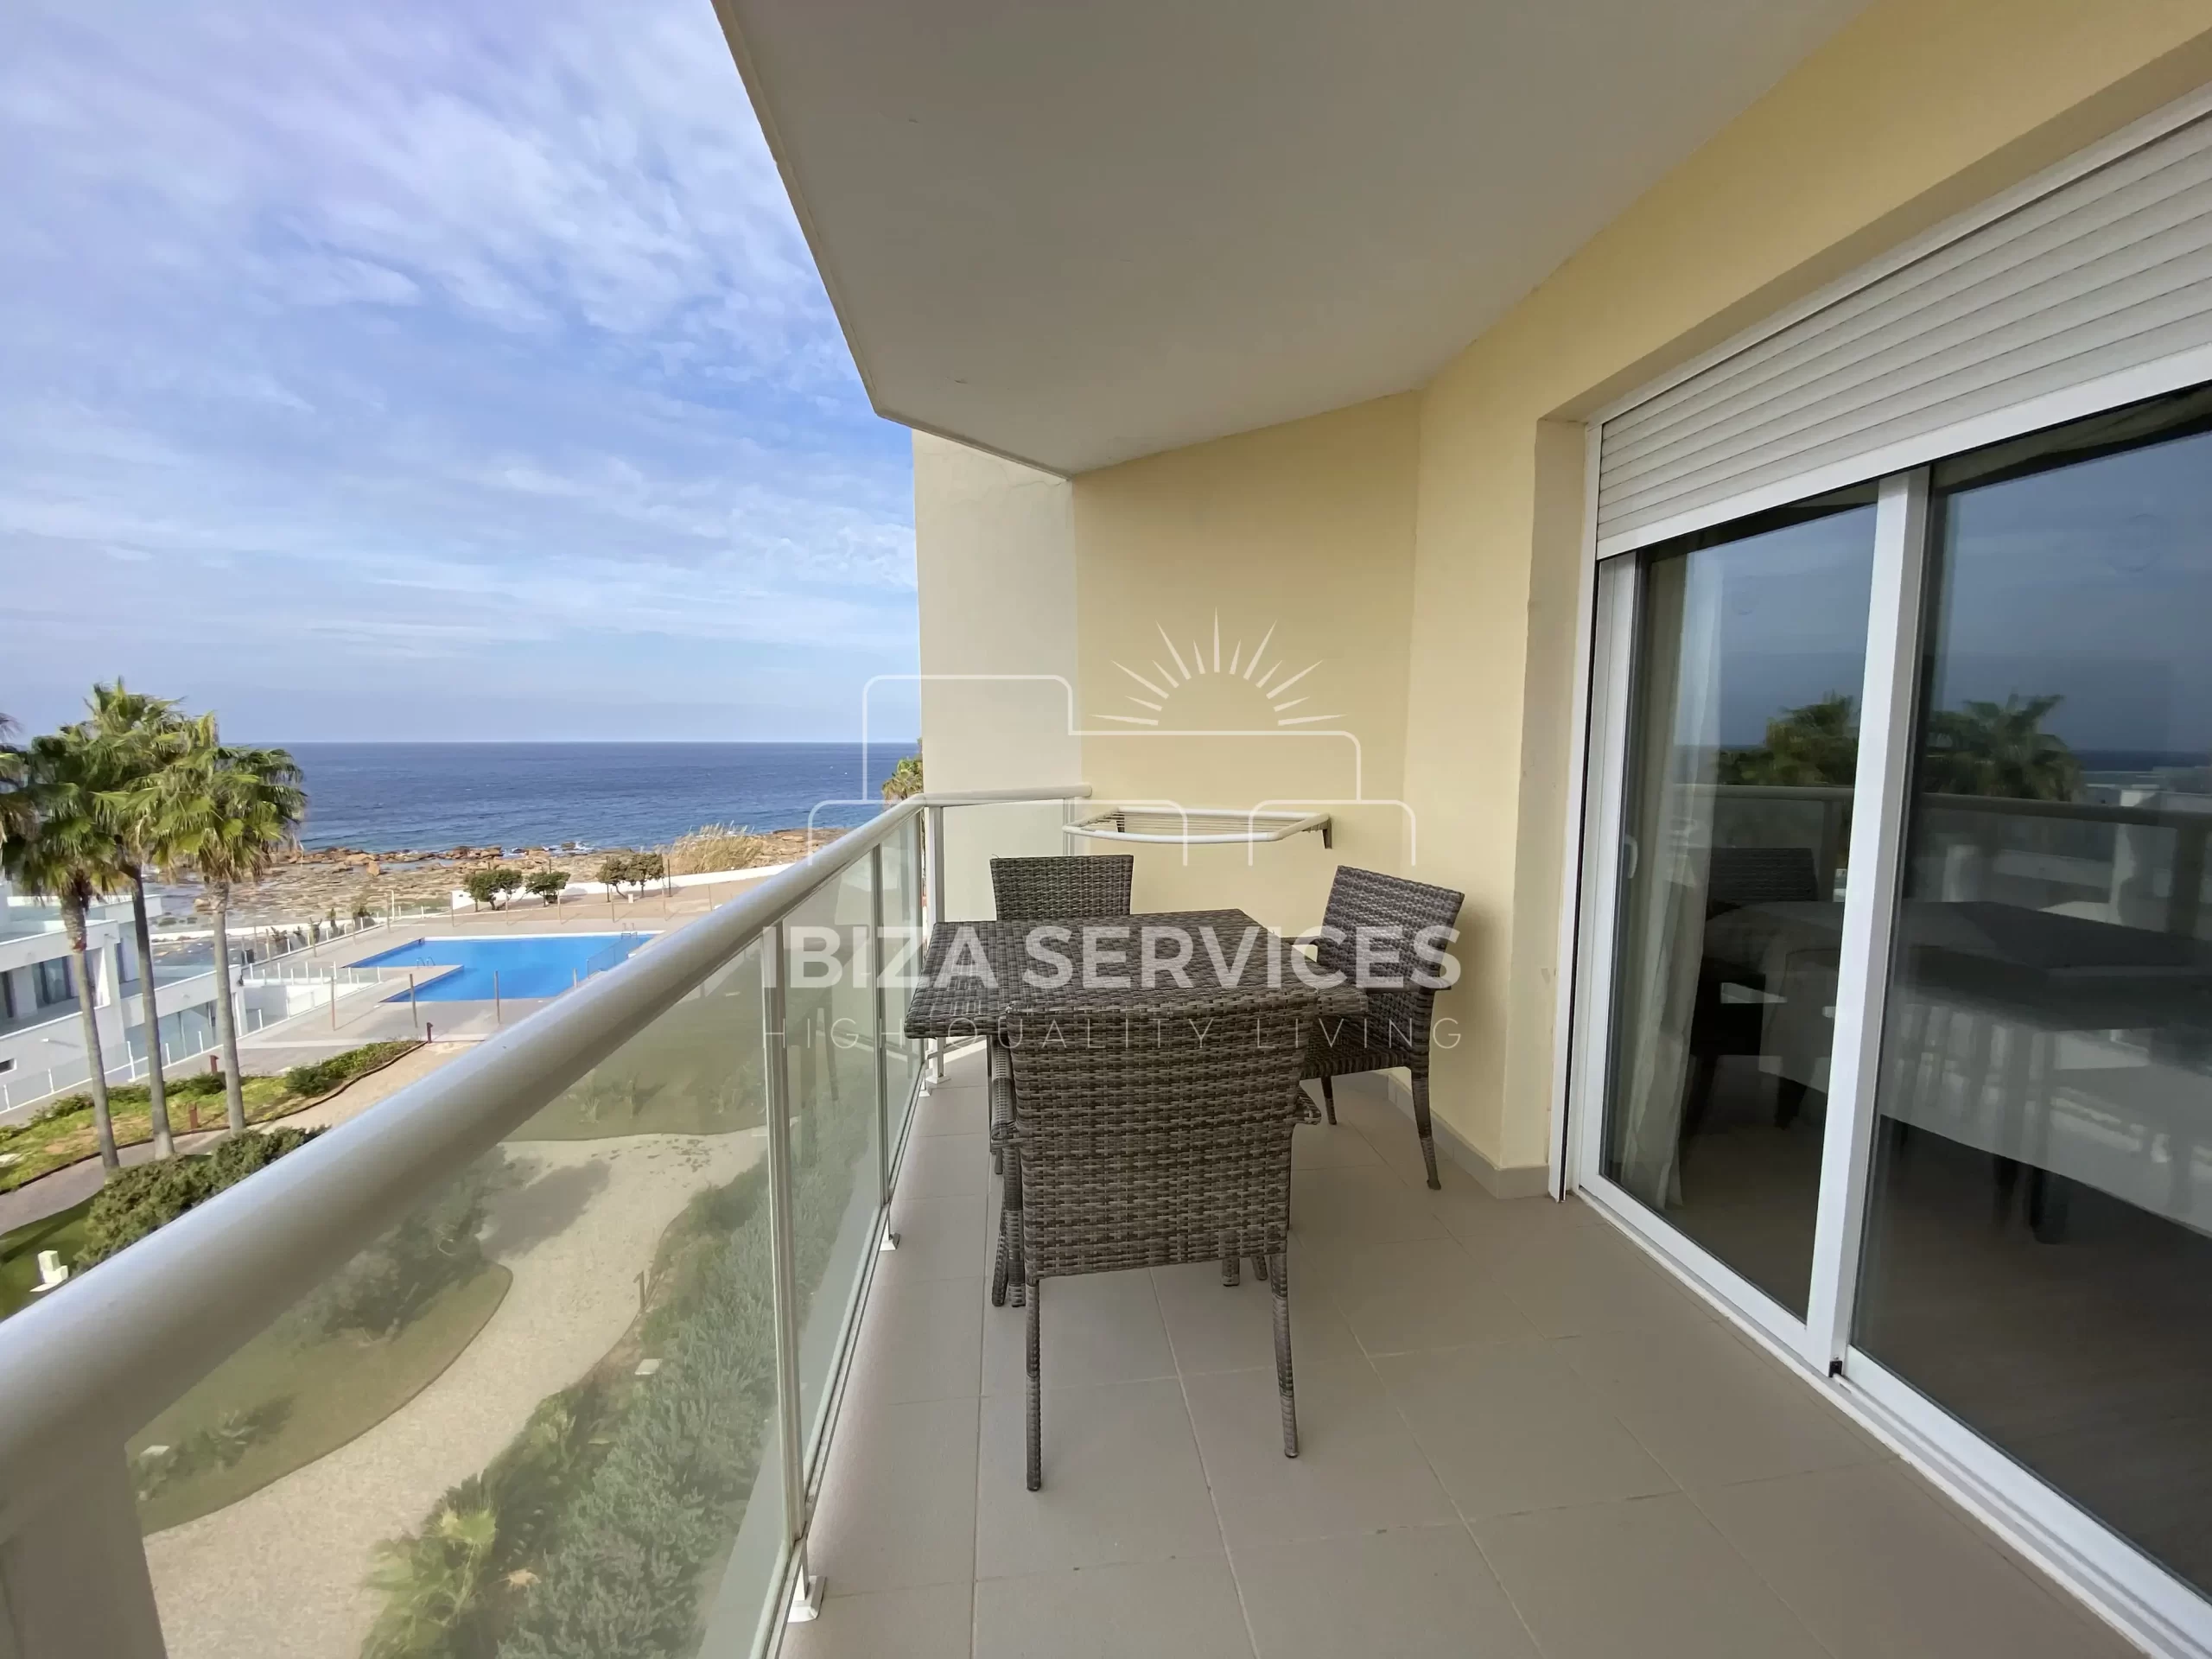 Seaview Tranquility: Enchanting Coastal Apartment For Sale.